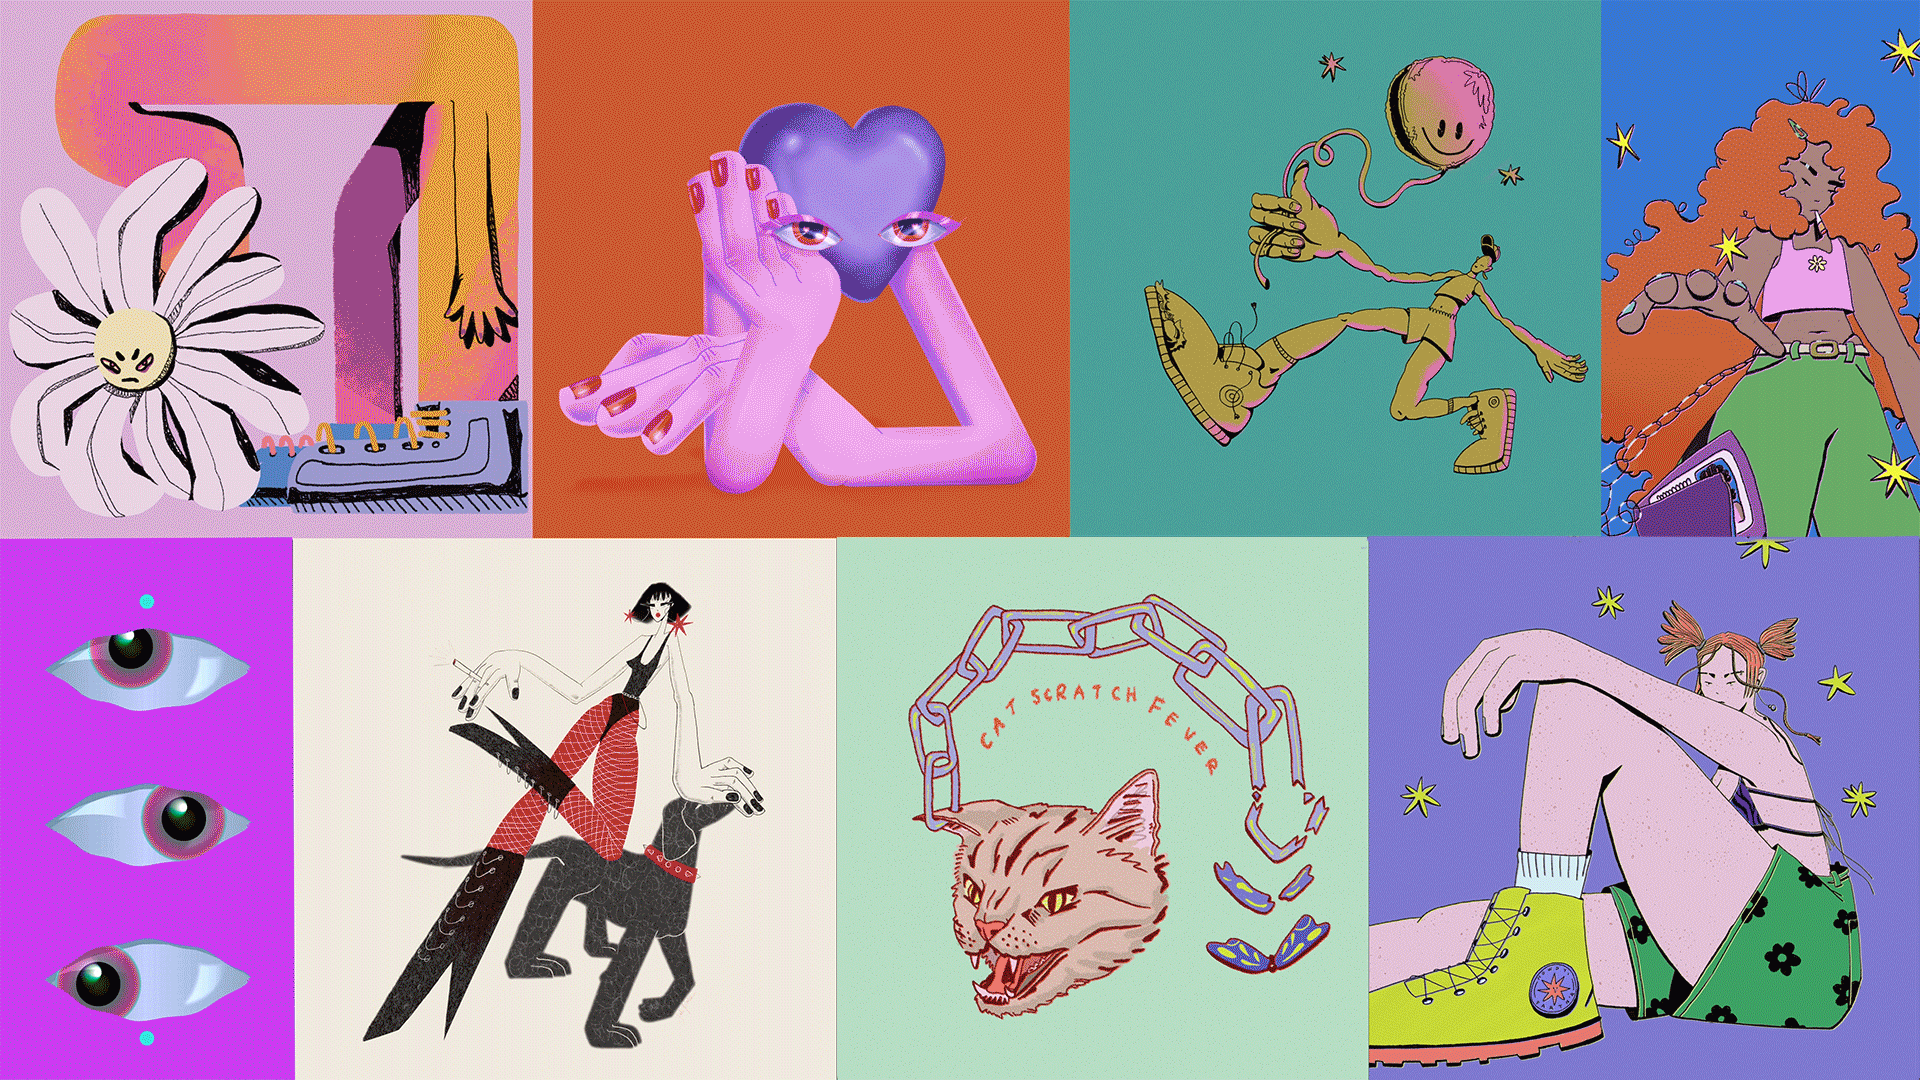 A tiled compilation of Talia’s illustration work is brought to life through moving gifs. Throughout the image, characters wink, walk, dance, and wag their tails.